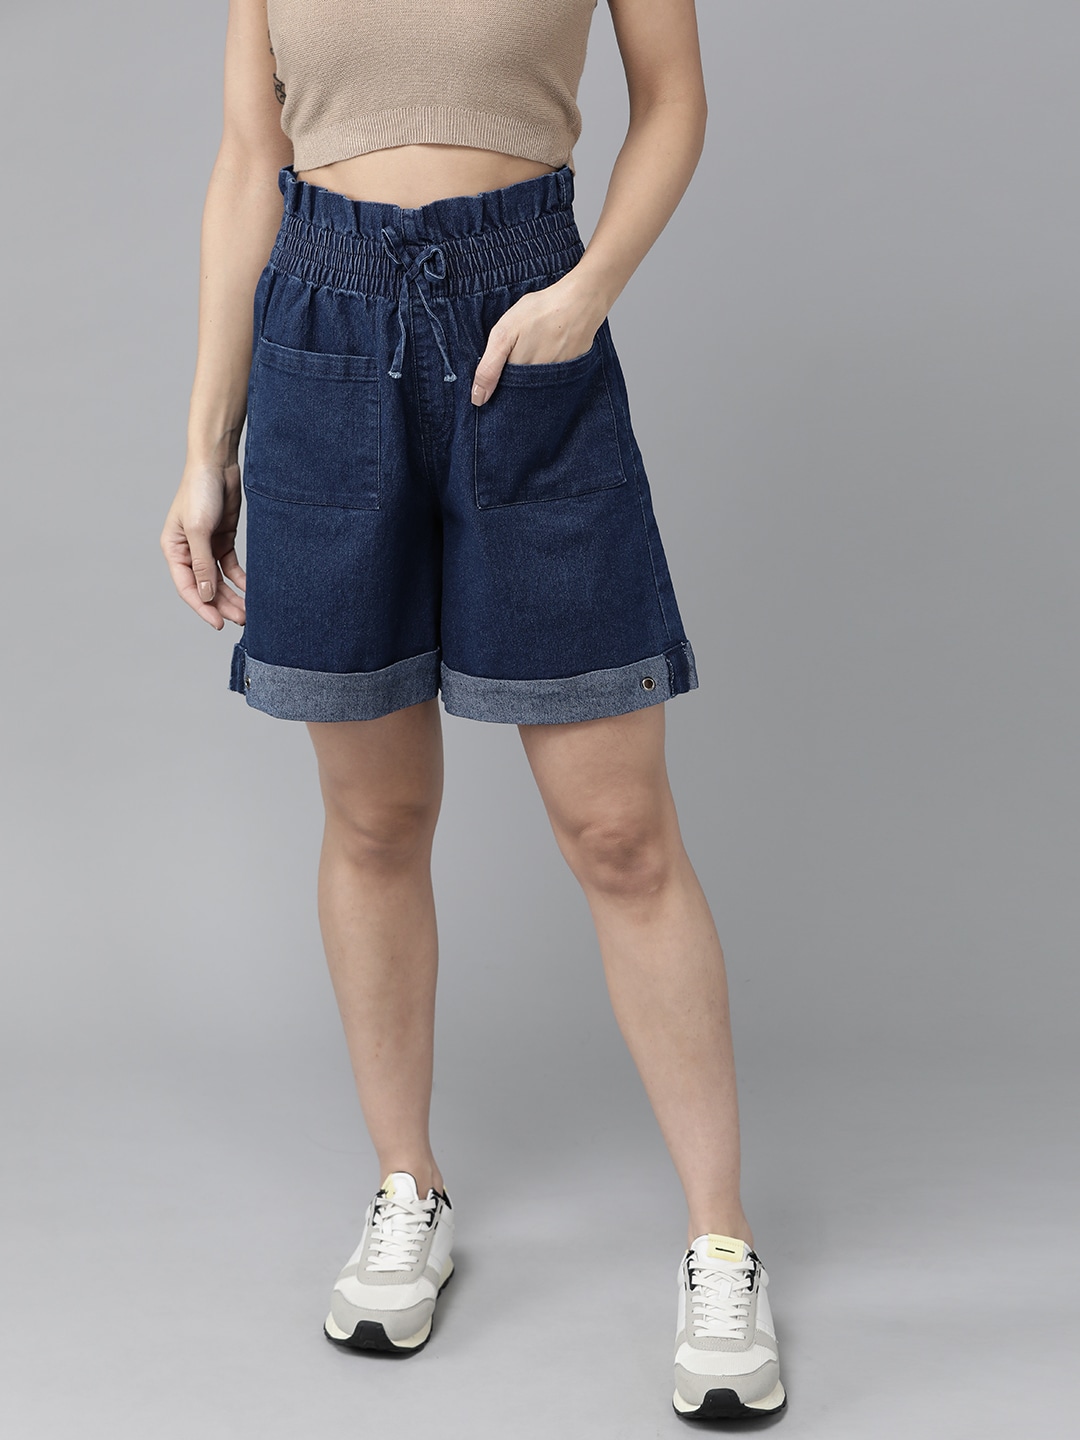 Roadster Women Navy Blue Regular Shorts with Paper Bag Style Price in India